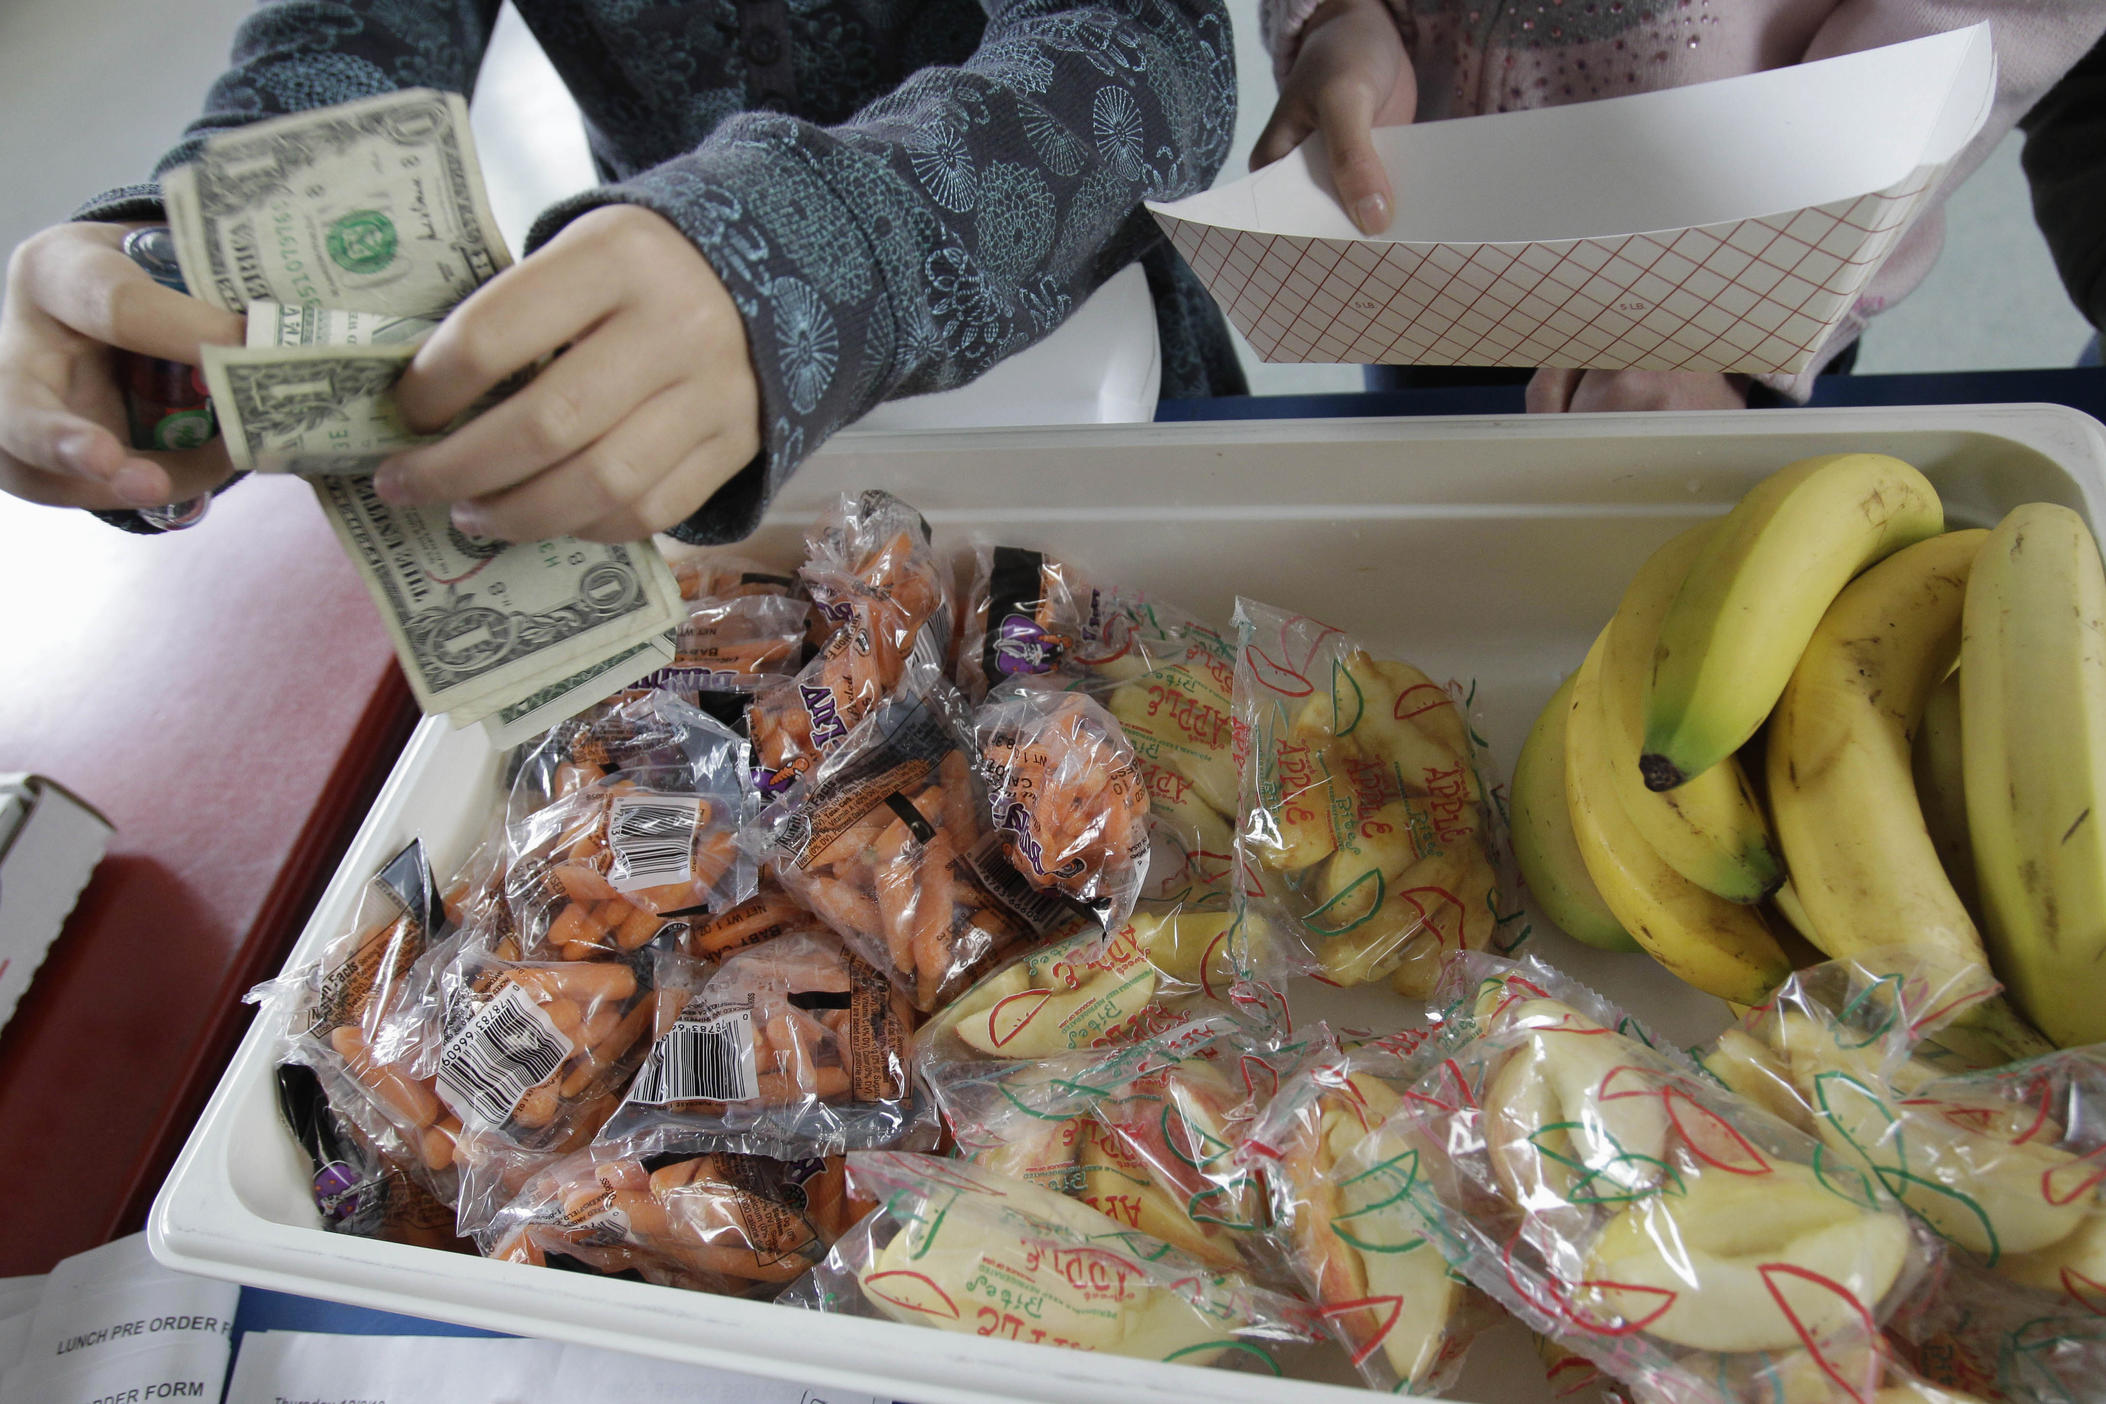 A student pays for a lunch of fruits and vegetables as part of a school lunch program.